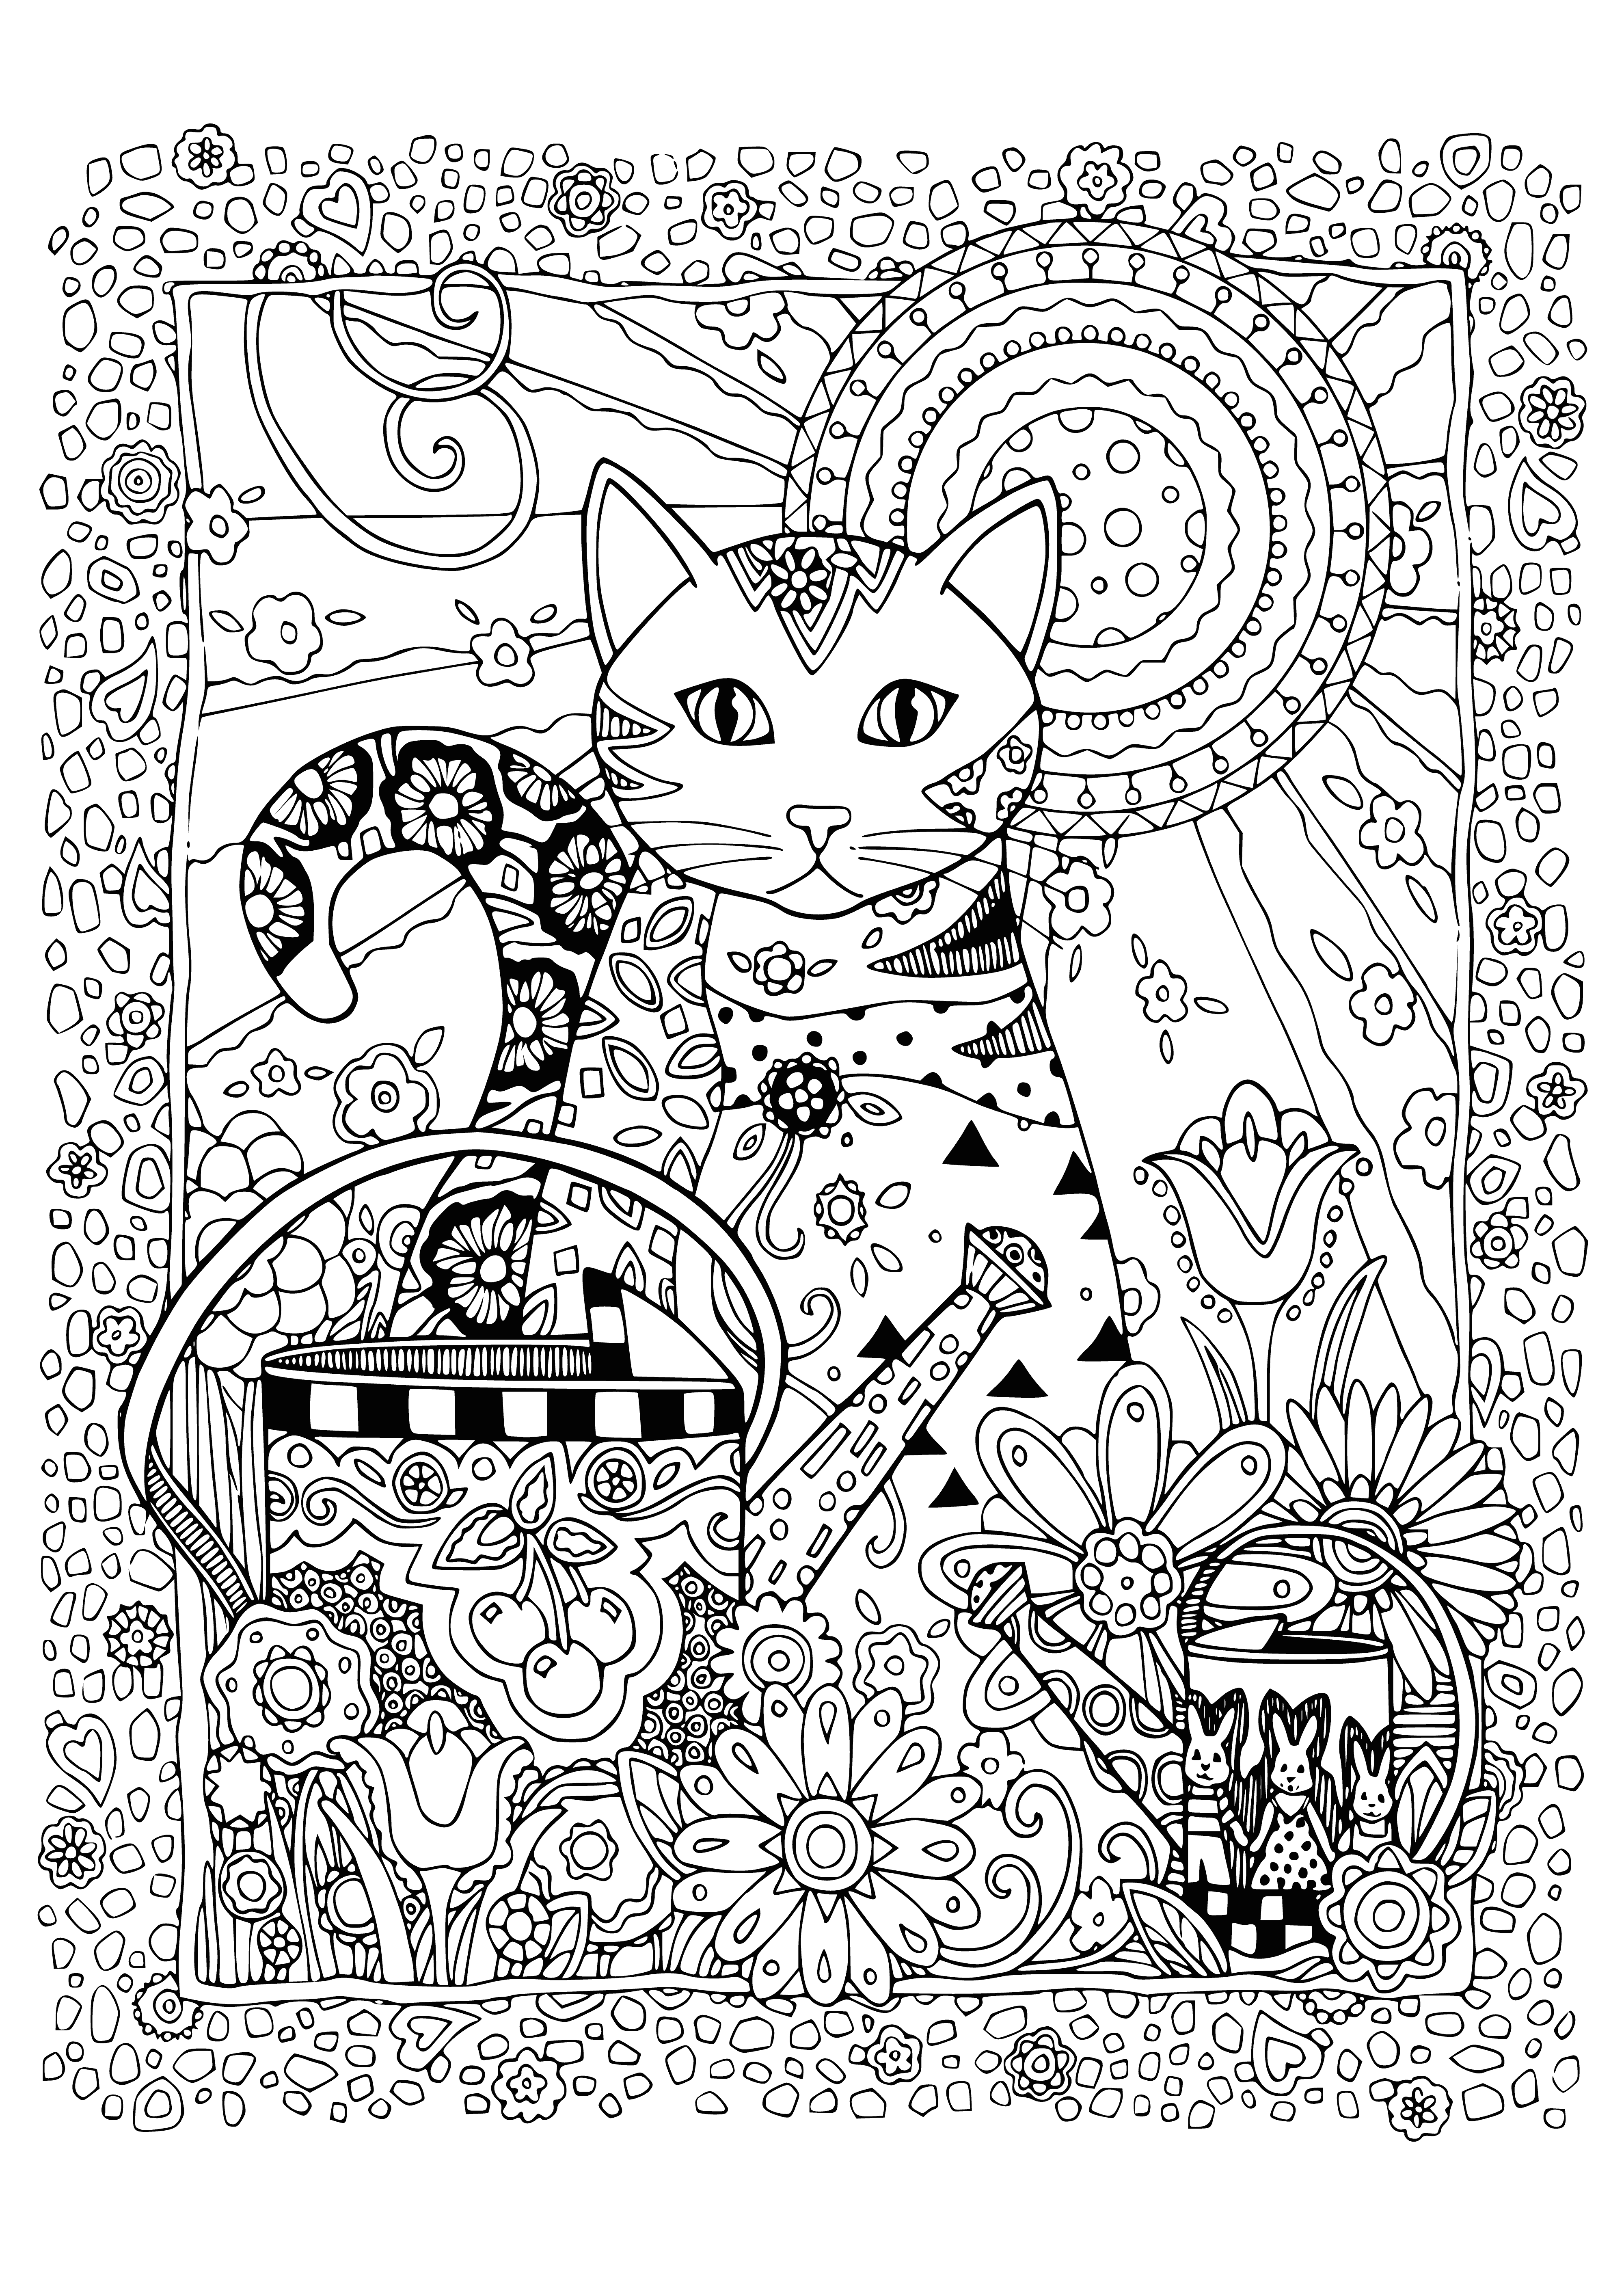 Cat in the garden coloring page